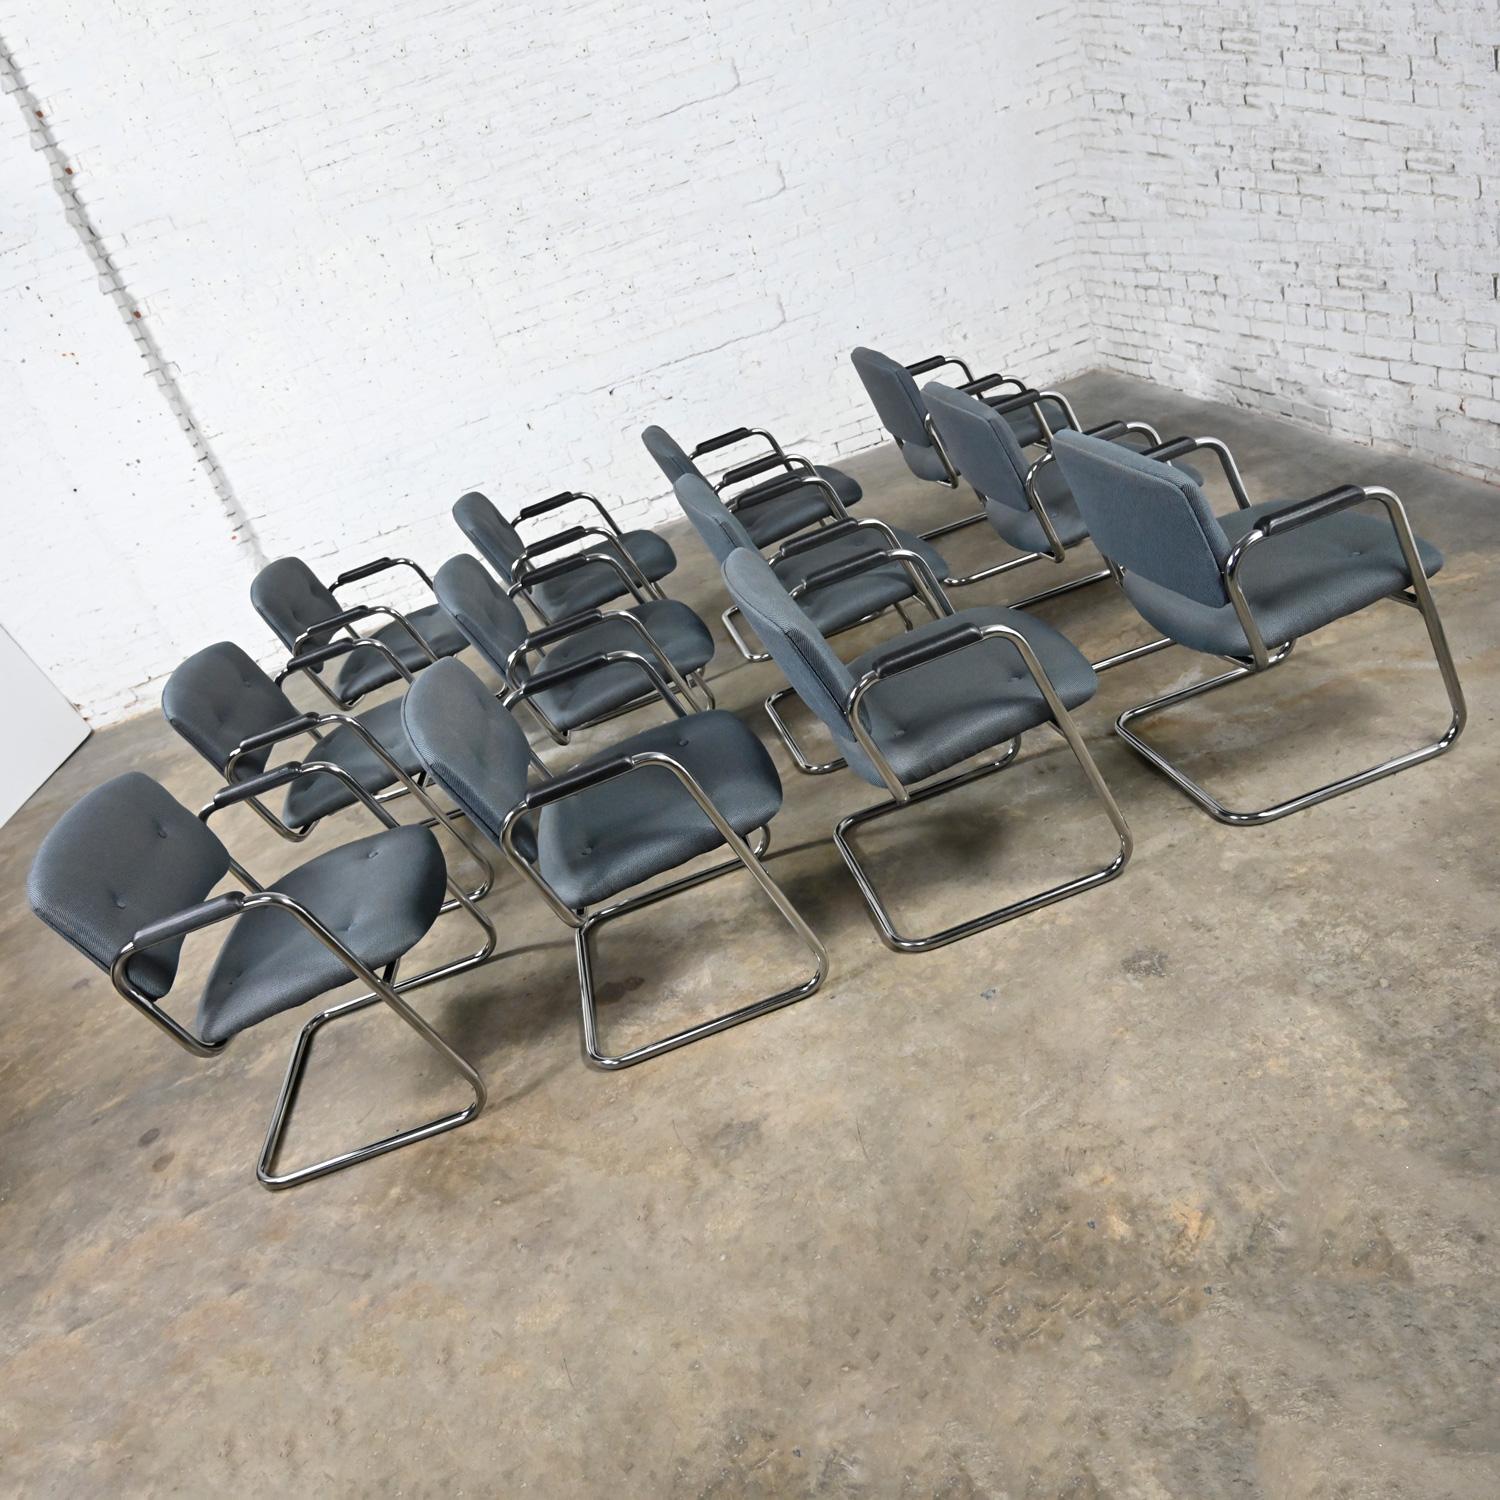 Late 20th Century Gray & Chrome Cantilever Chairs Style Steelcase Set of 12 For Sale 2